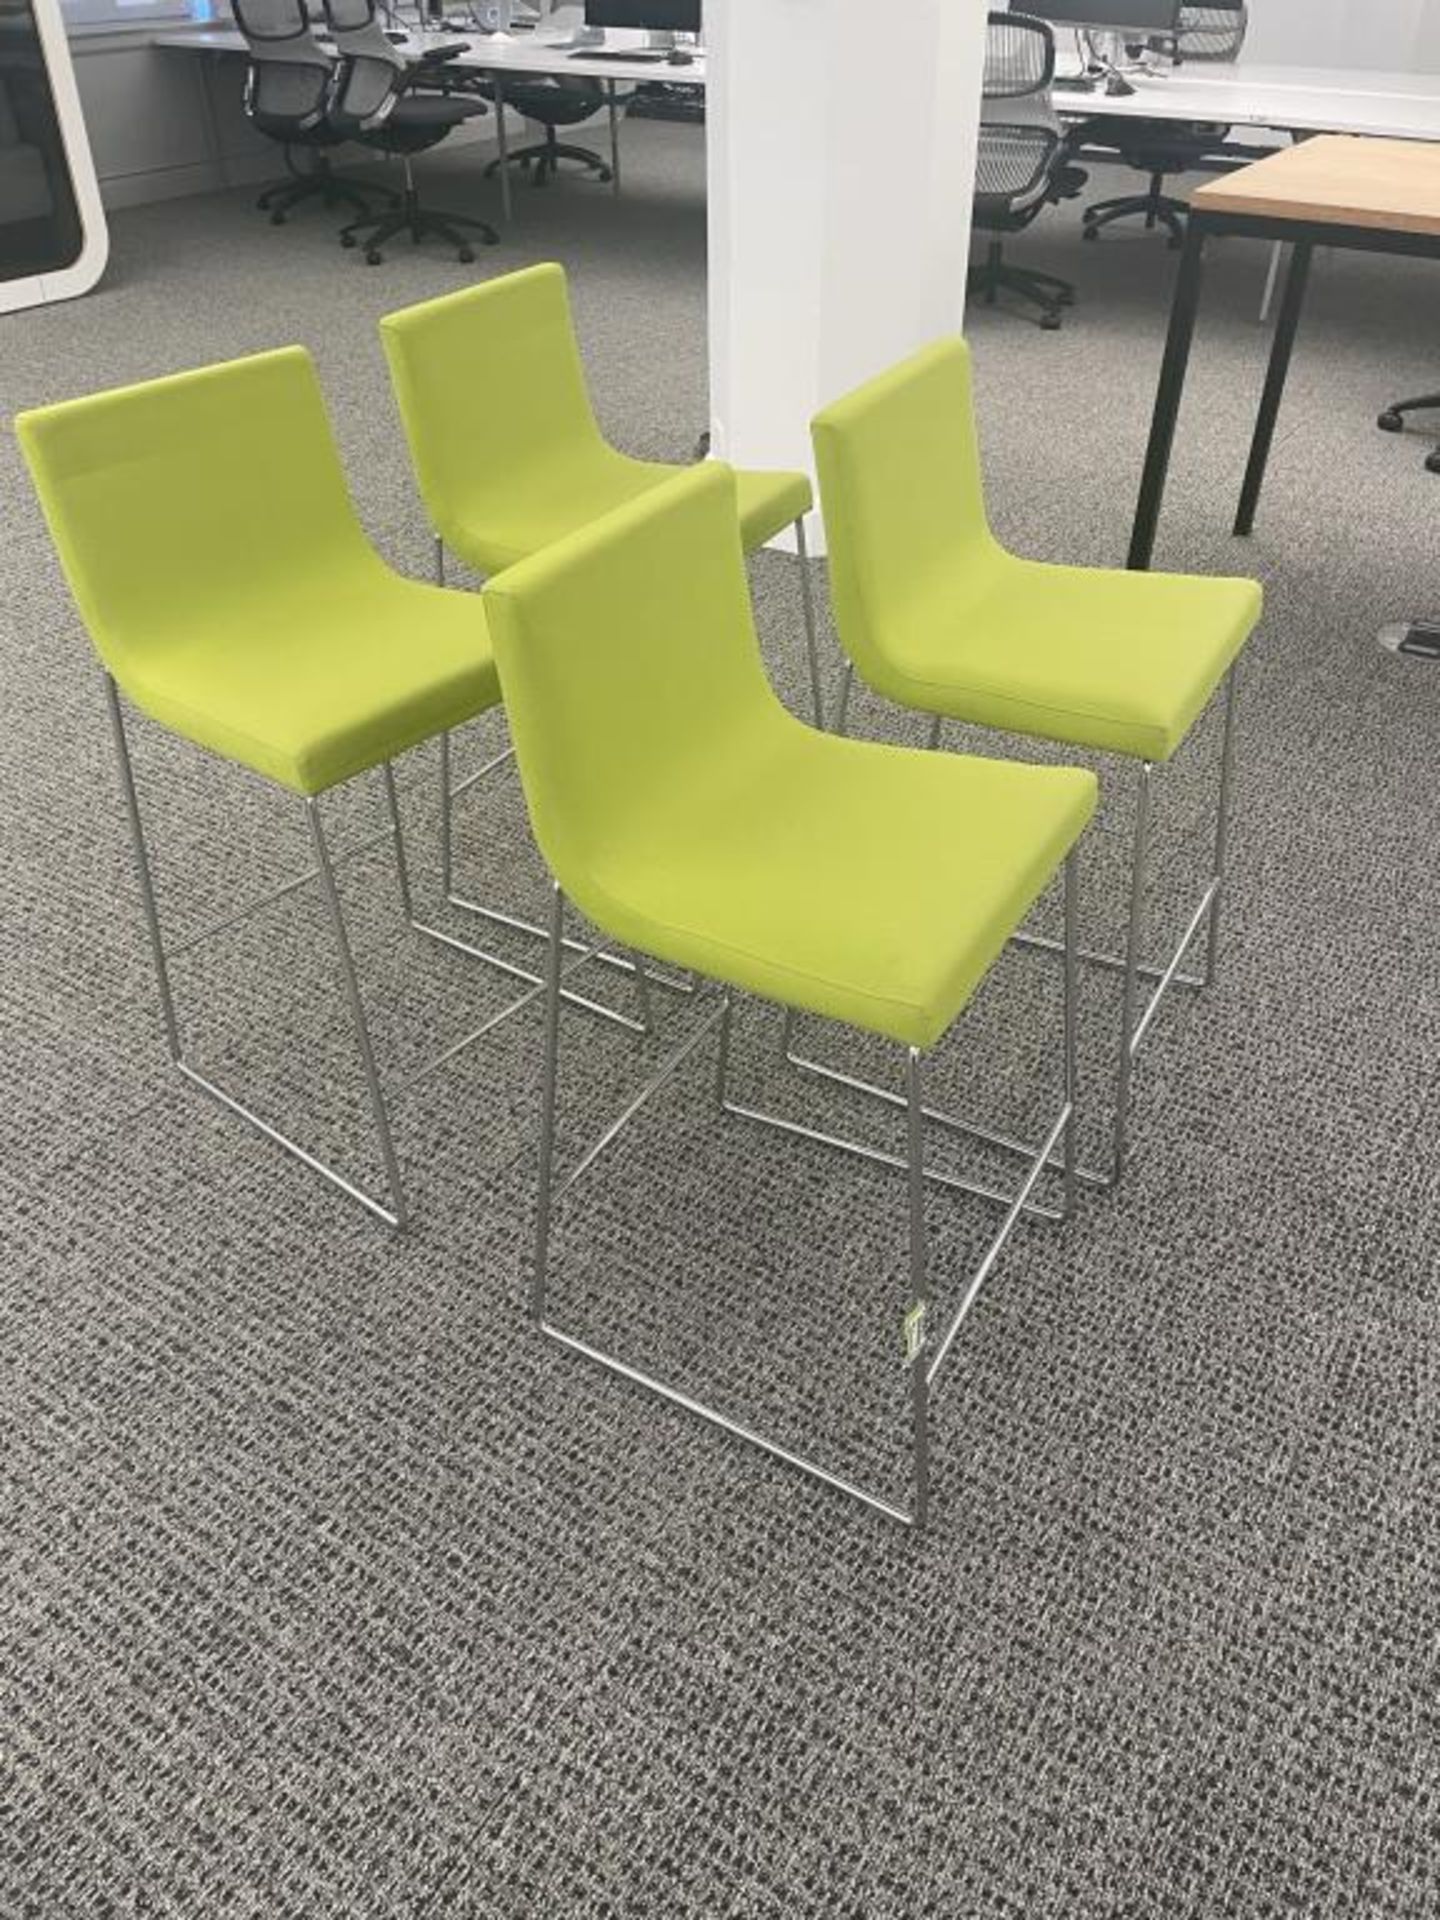 (4qty) Andreu World Lineal Comfort Stools, Lime - Image 2 of 5